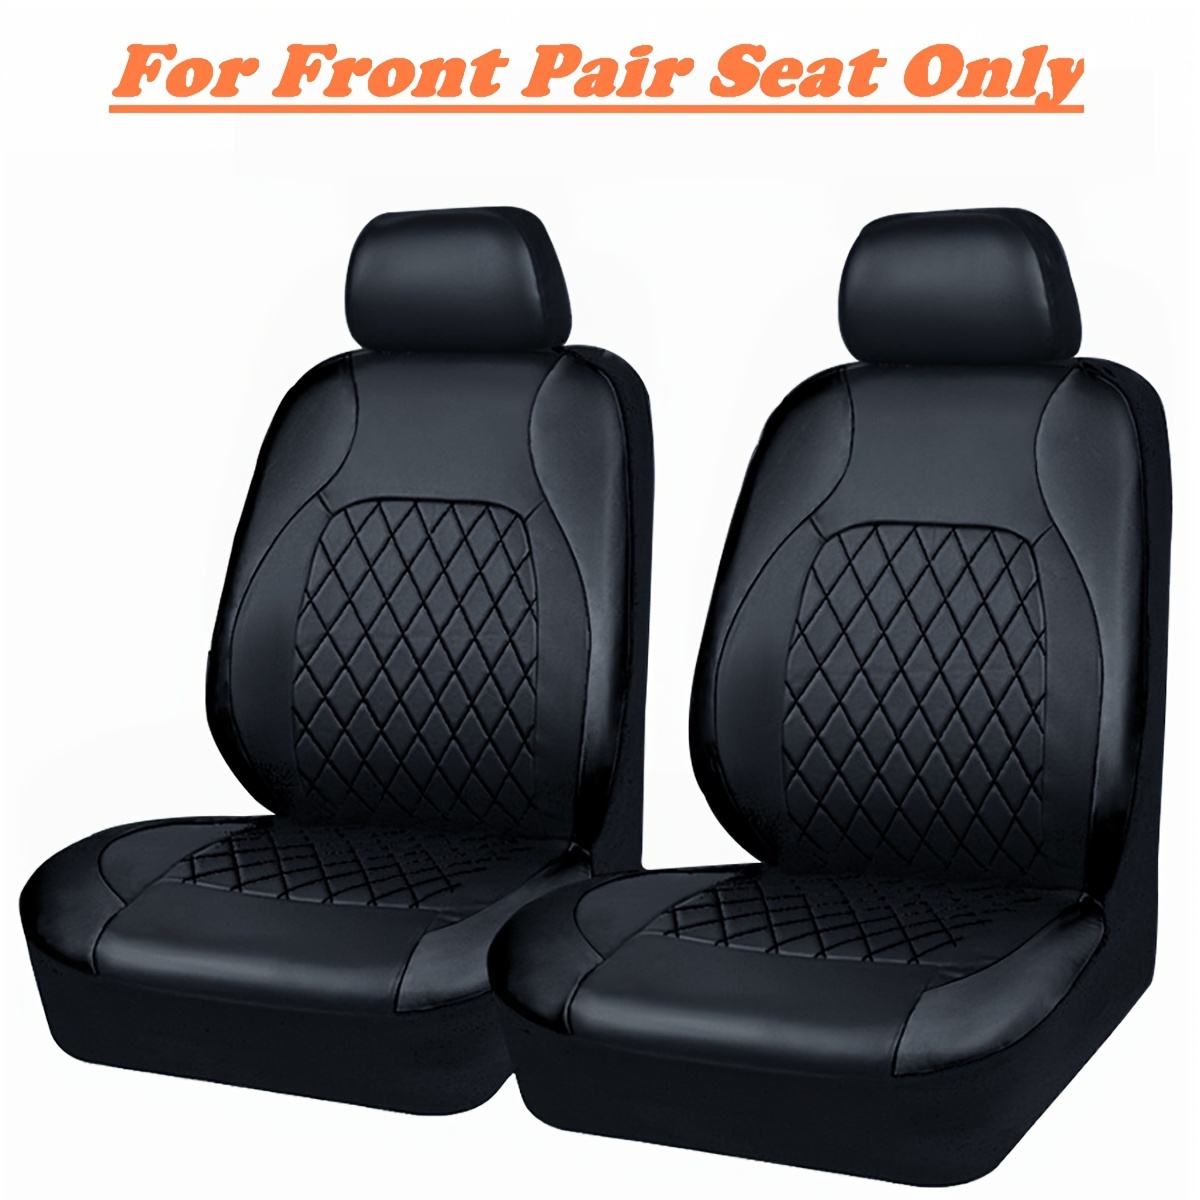 2pcs Car Front Seat Faux Leather Car Seat Covers, Car Seat Protector  Covers, Removable Headrest Washable Car Seat Cover For Car, SUV, Van, Sedan